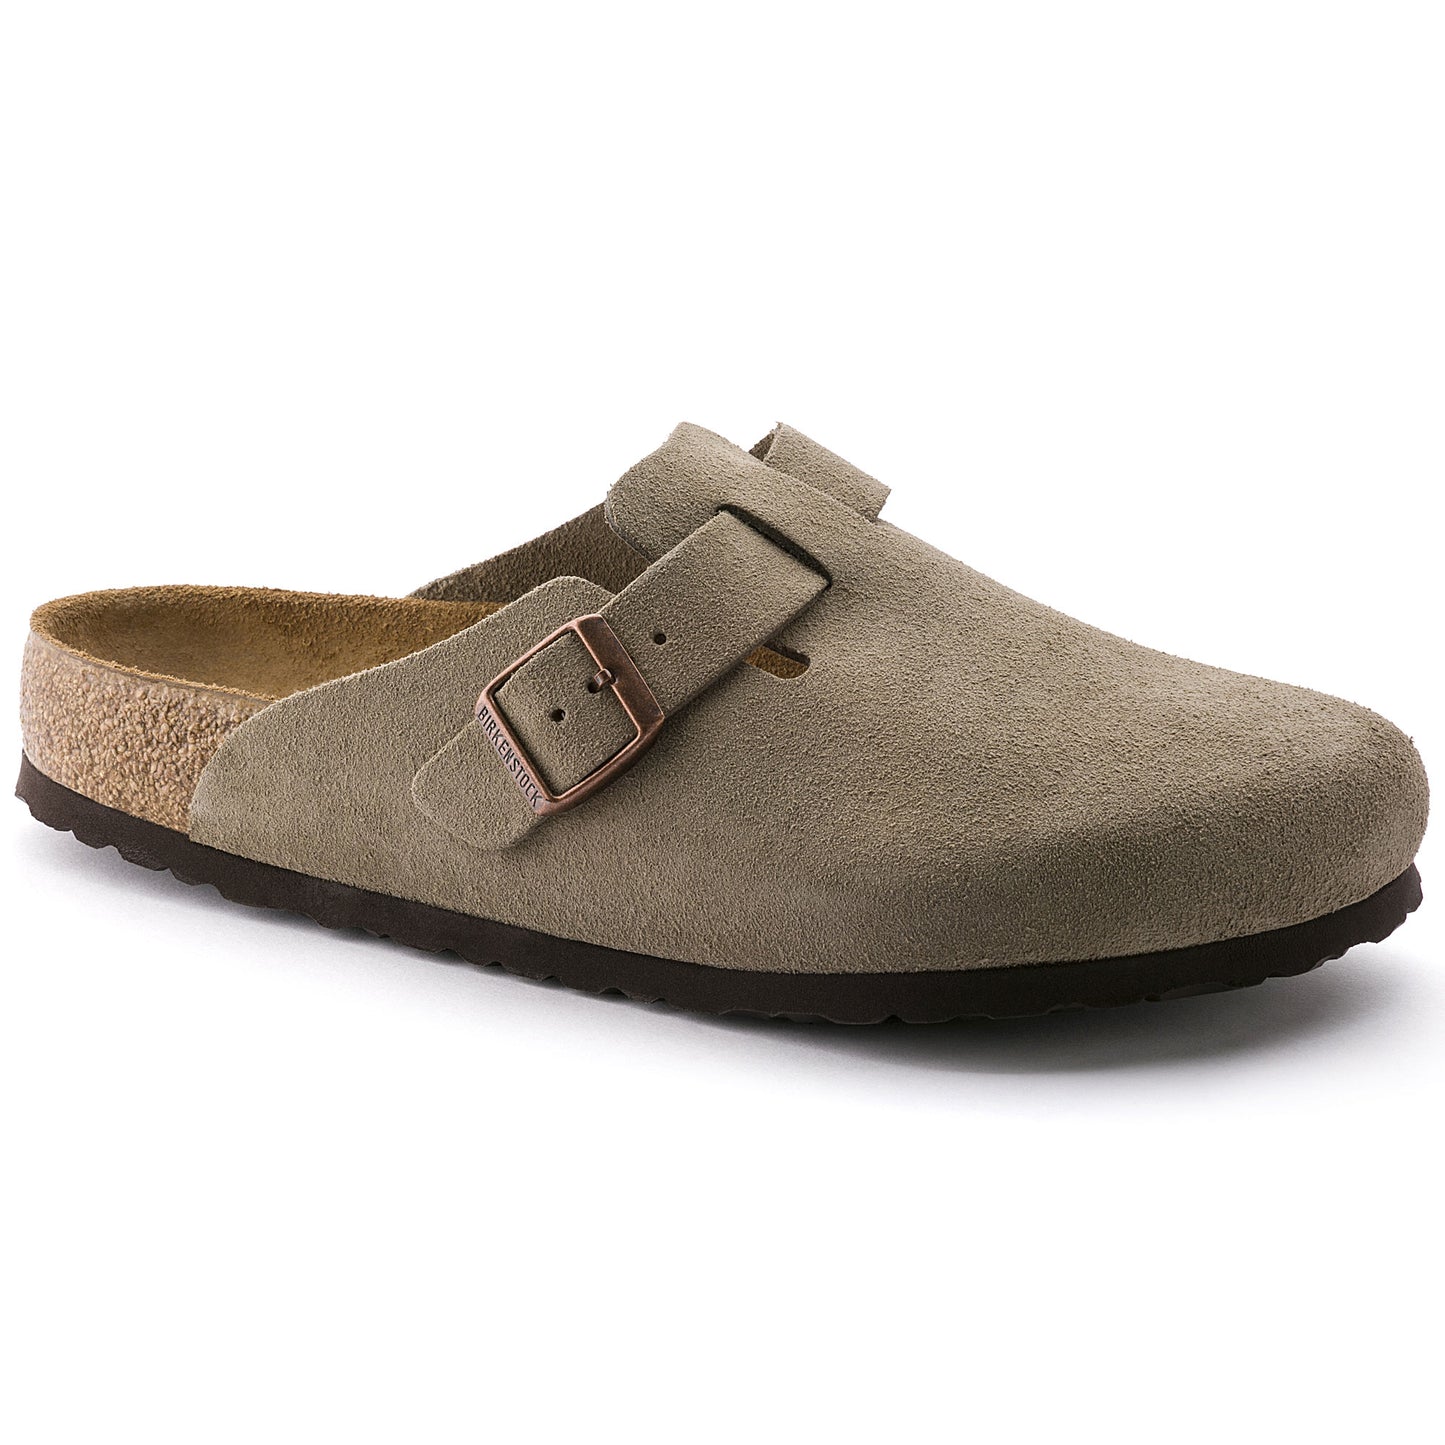 Boston Soft Footbed Suede Leather Regular